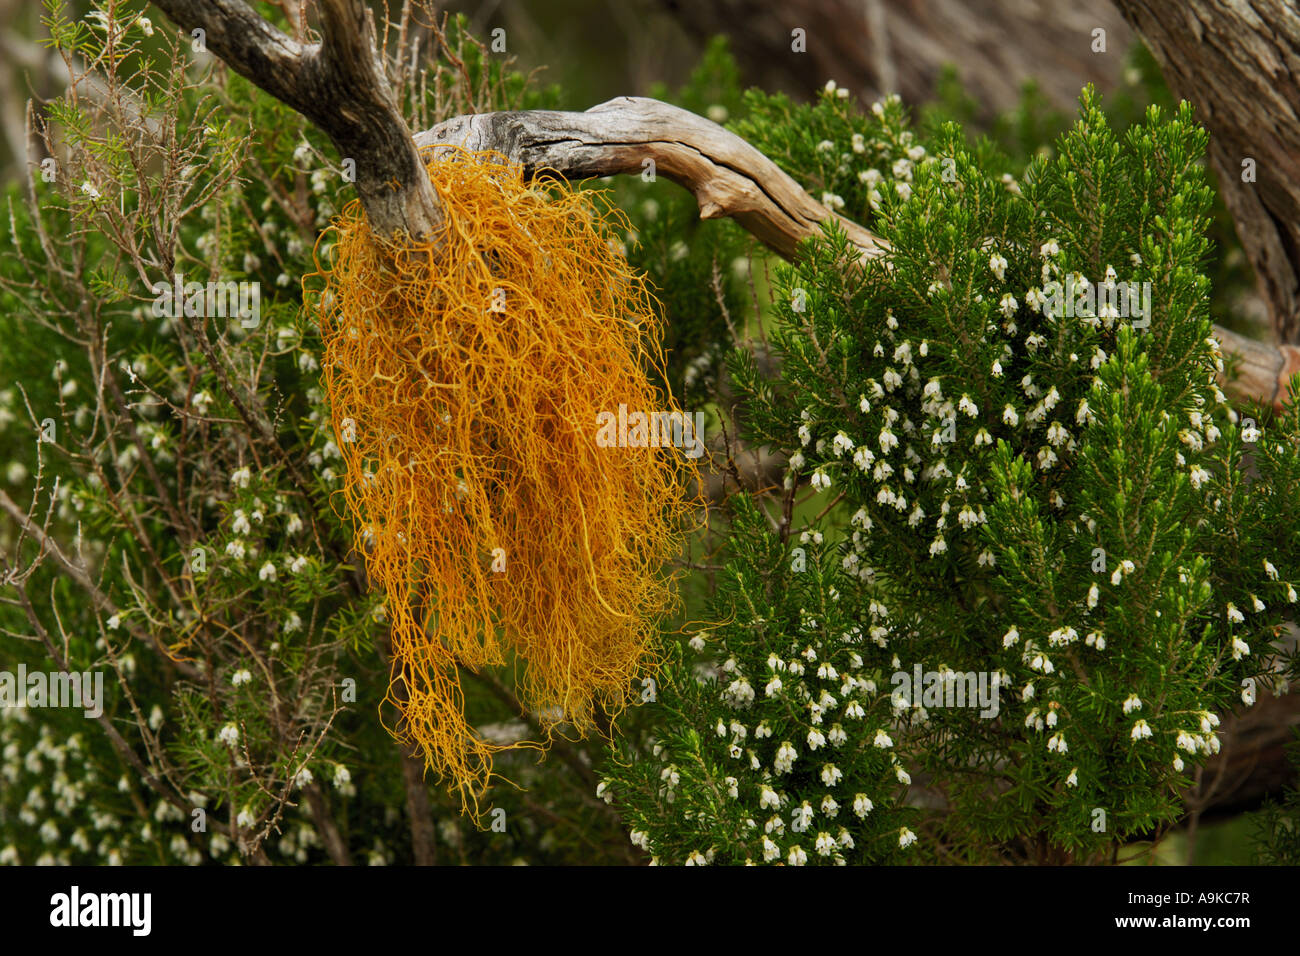 tree heath (Erica arborea), blooming tree with lichen, Portugal, Madeira Stock Photo